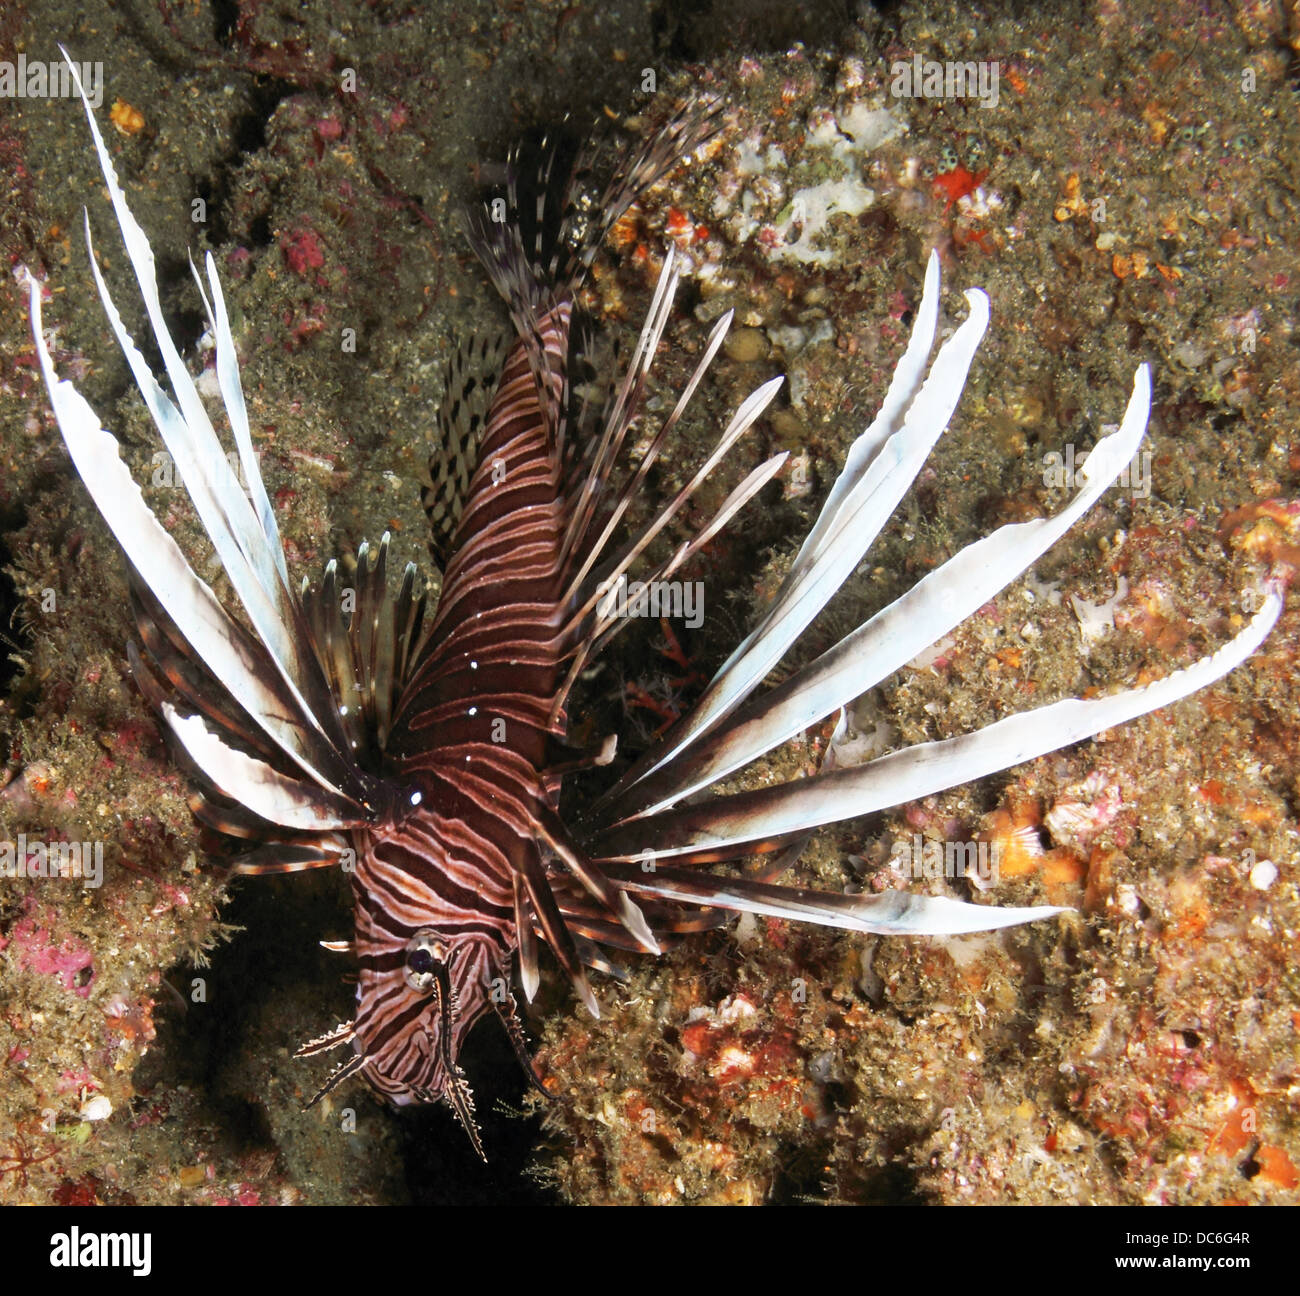 An invasive Lionfish with rays displayed. Stock Photo